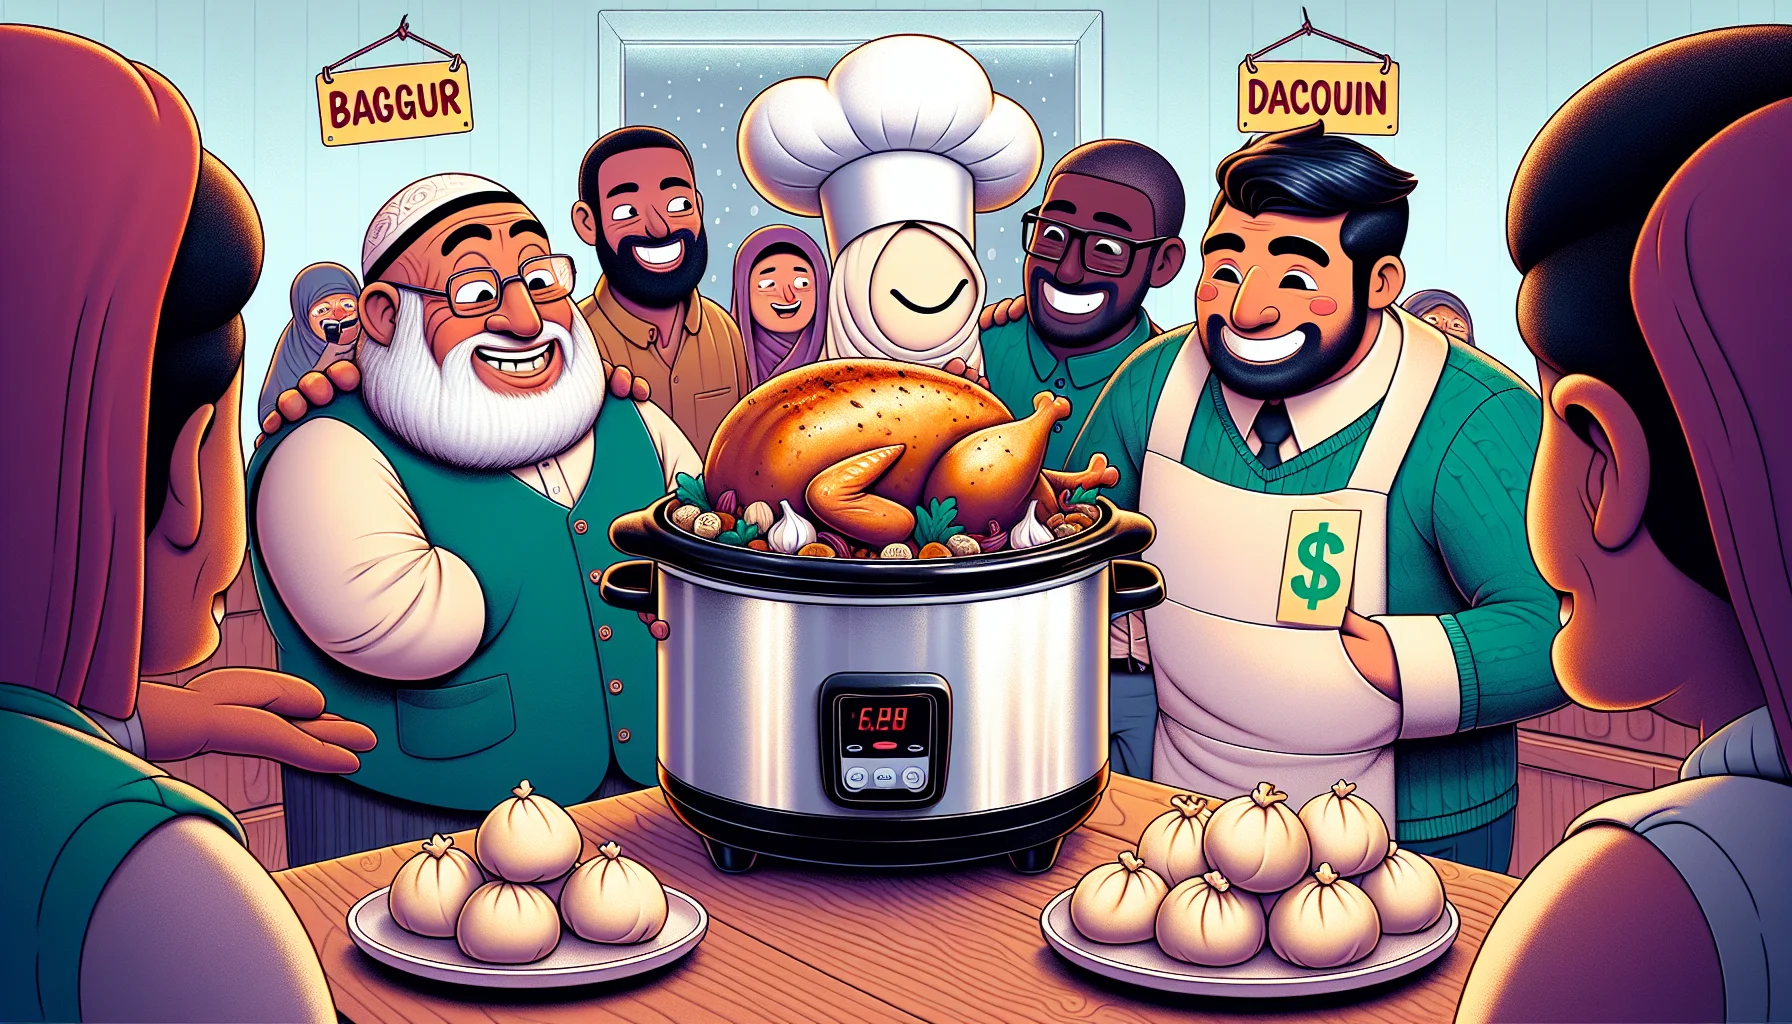 Illustrate a humorous scene where an anthropomorphic slow-cooker is at the center of attention, donning a chef’s hat and apron displaying a hearty plate loaded with succulent chicken simmered to perfect tenderness and fluffy garlic dumplings. A diverse group of people, including a Middle-Eastern man and a South Asian woman, are eagerly awaiting their share, their pockets turned inside out to signify limited budget, meanwhile their faces light up with delight and anticipation. The background could be a cozy kitchen with bargain tags and discount signs hung to emphasize the affordability of the tasty home-cooked meal.